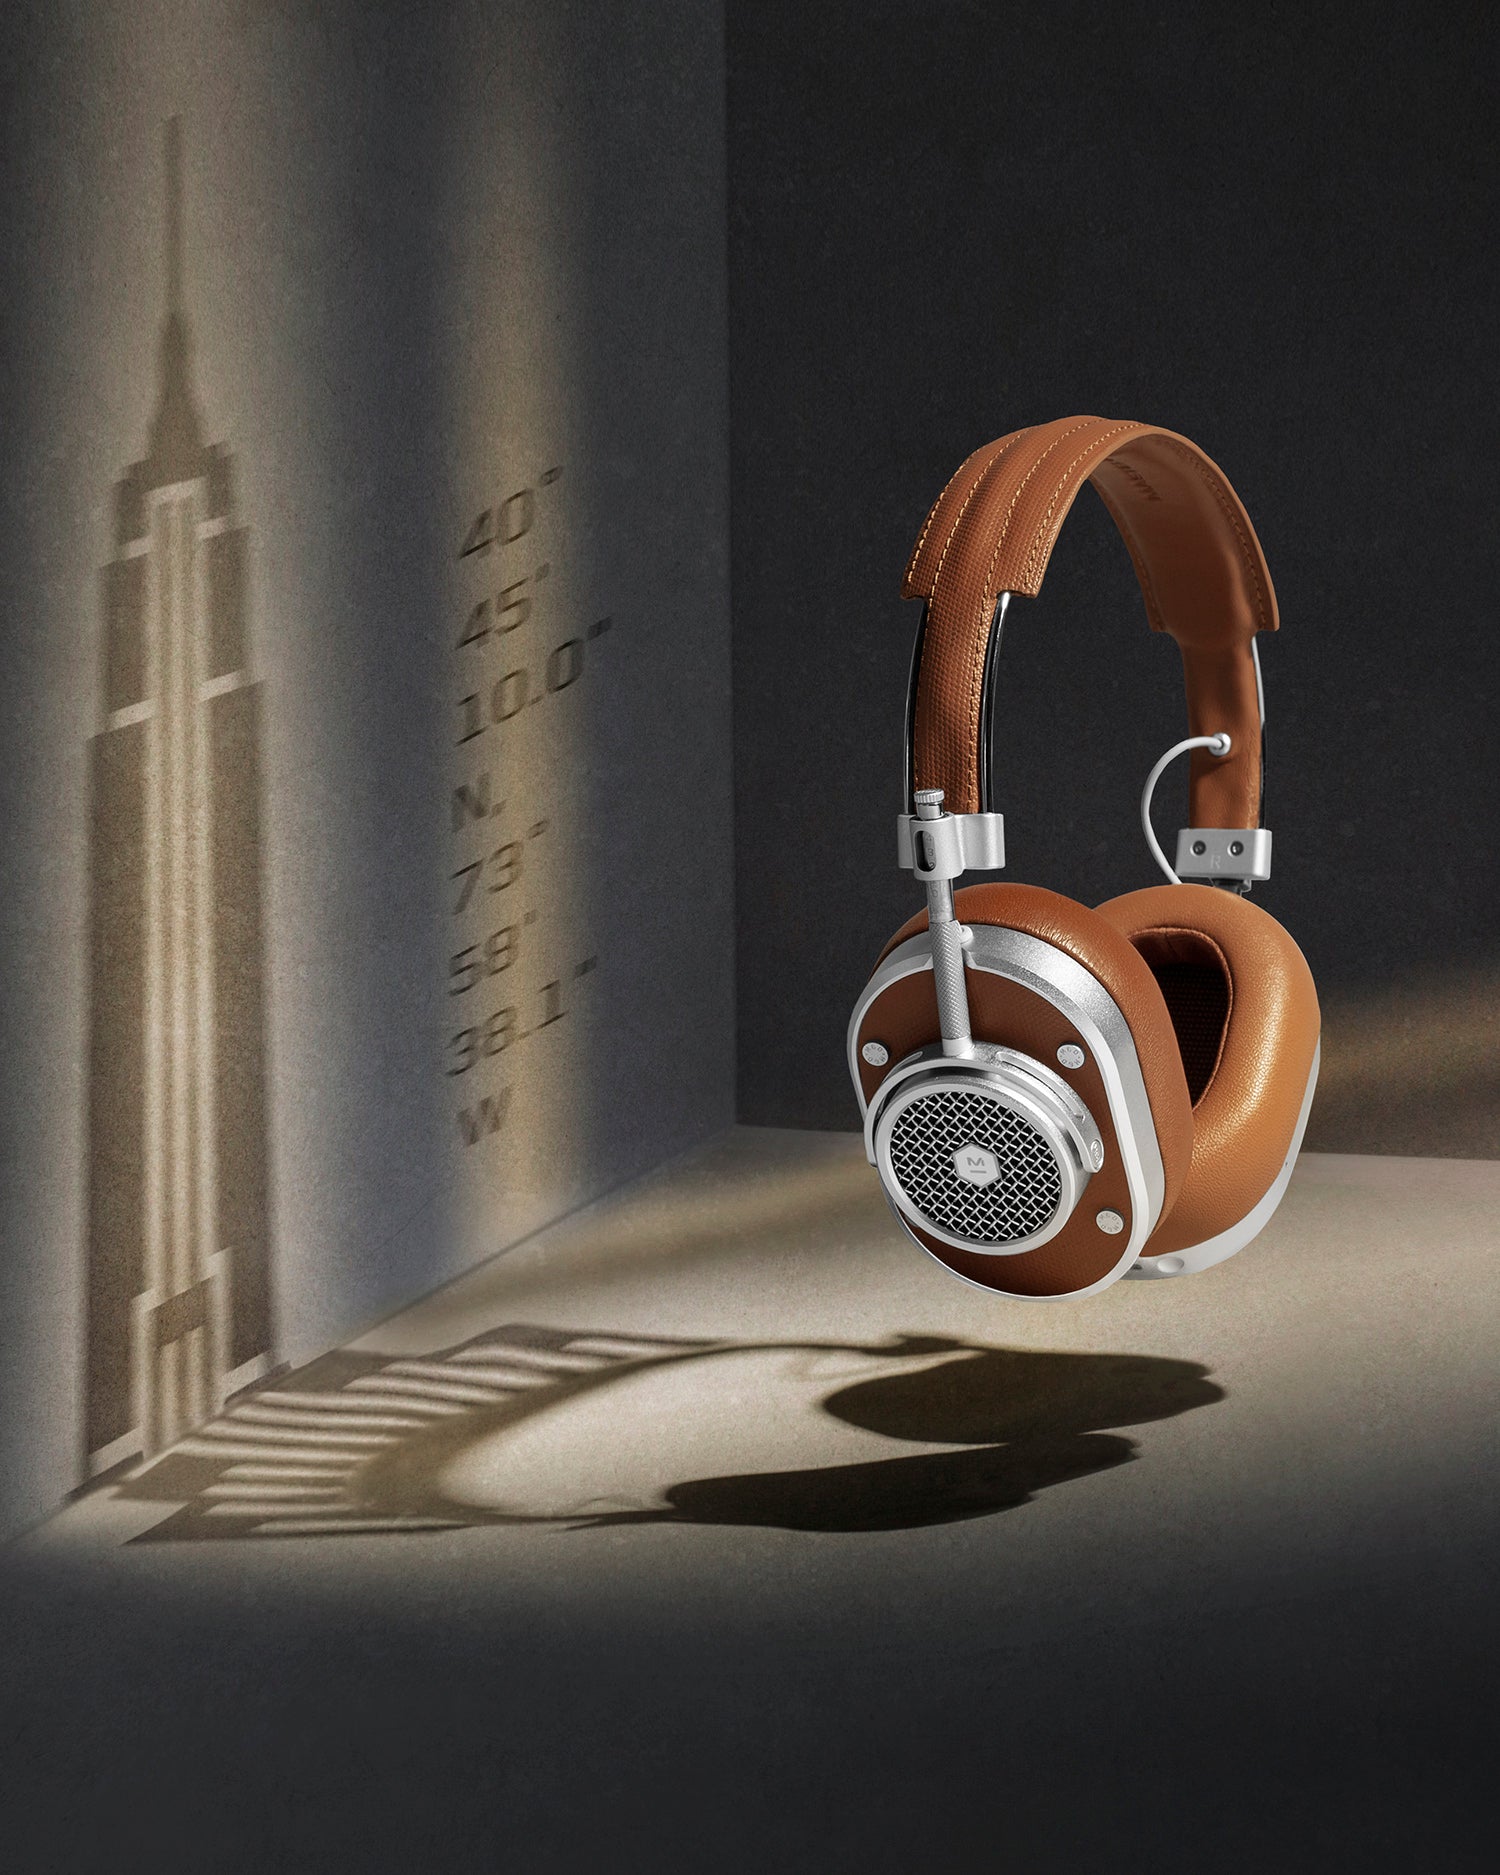 Master and Dynamic + Louis Vuitton = Horizon Earphones – You and I